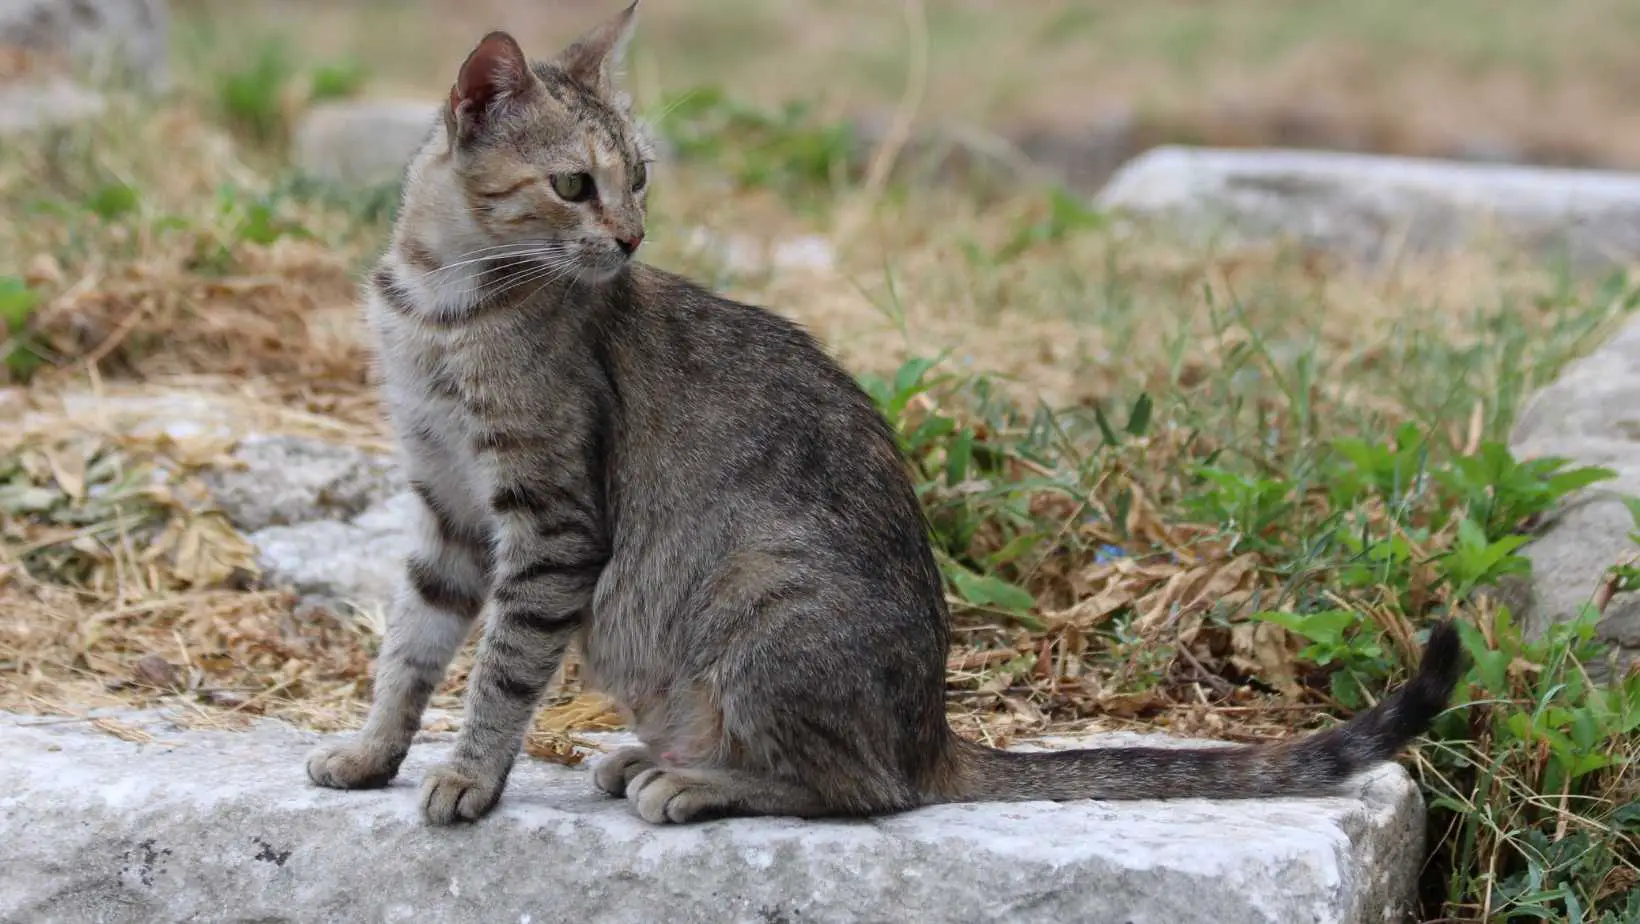 How to Get Rid of a Feral Cat?